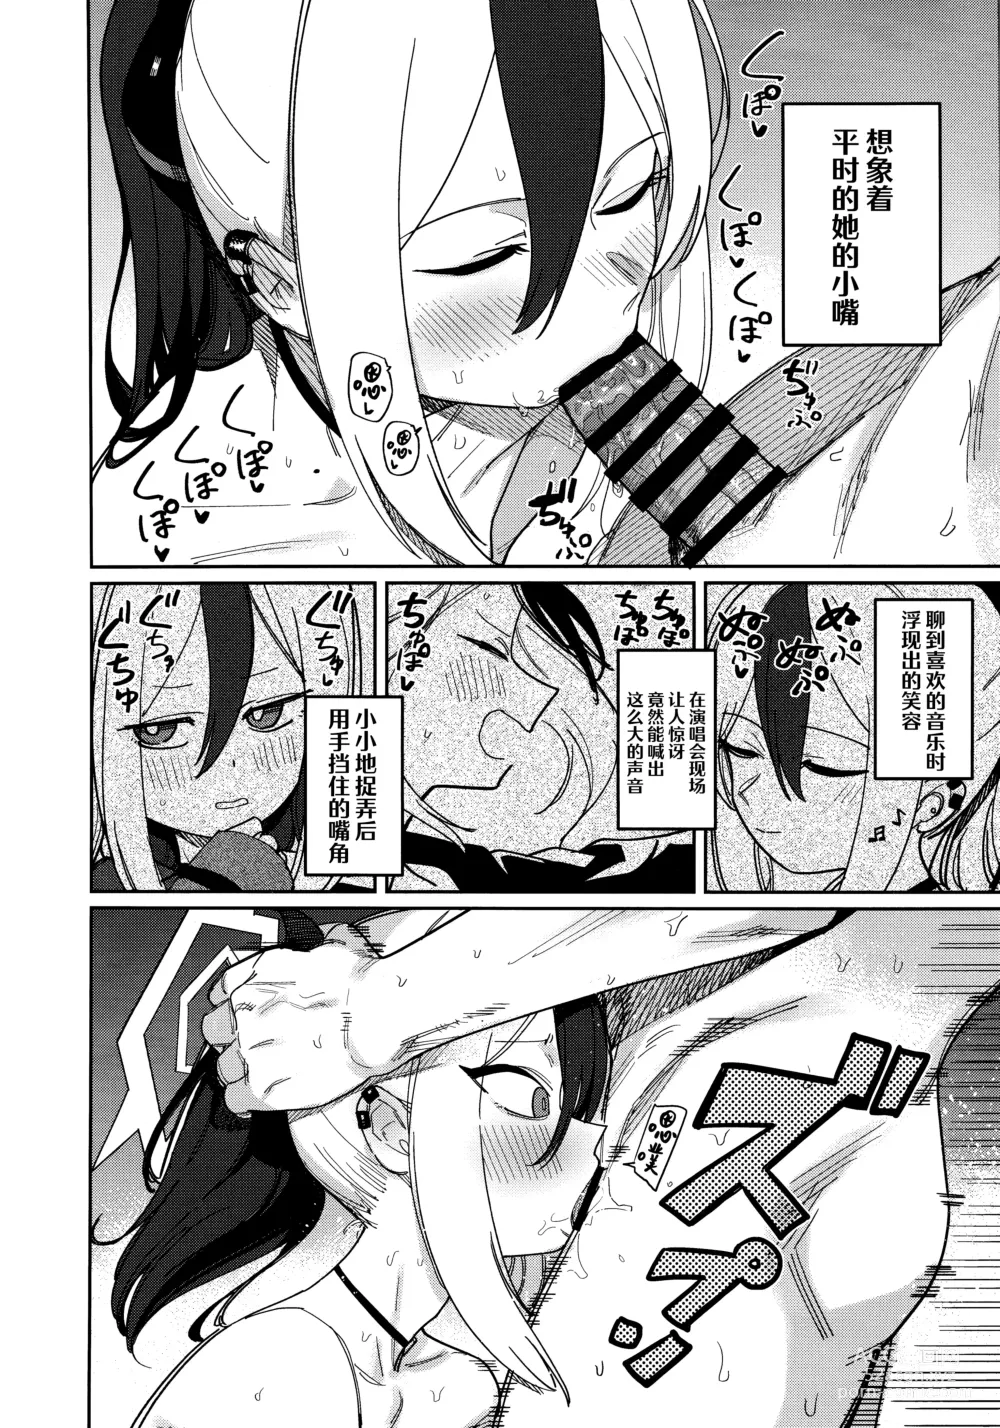 Page 12 of doujinshi 鬼方佳代子不会做这种事情 Part.2